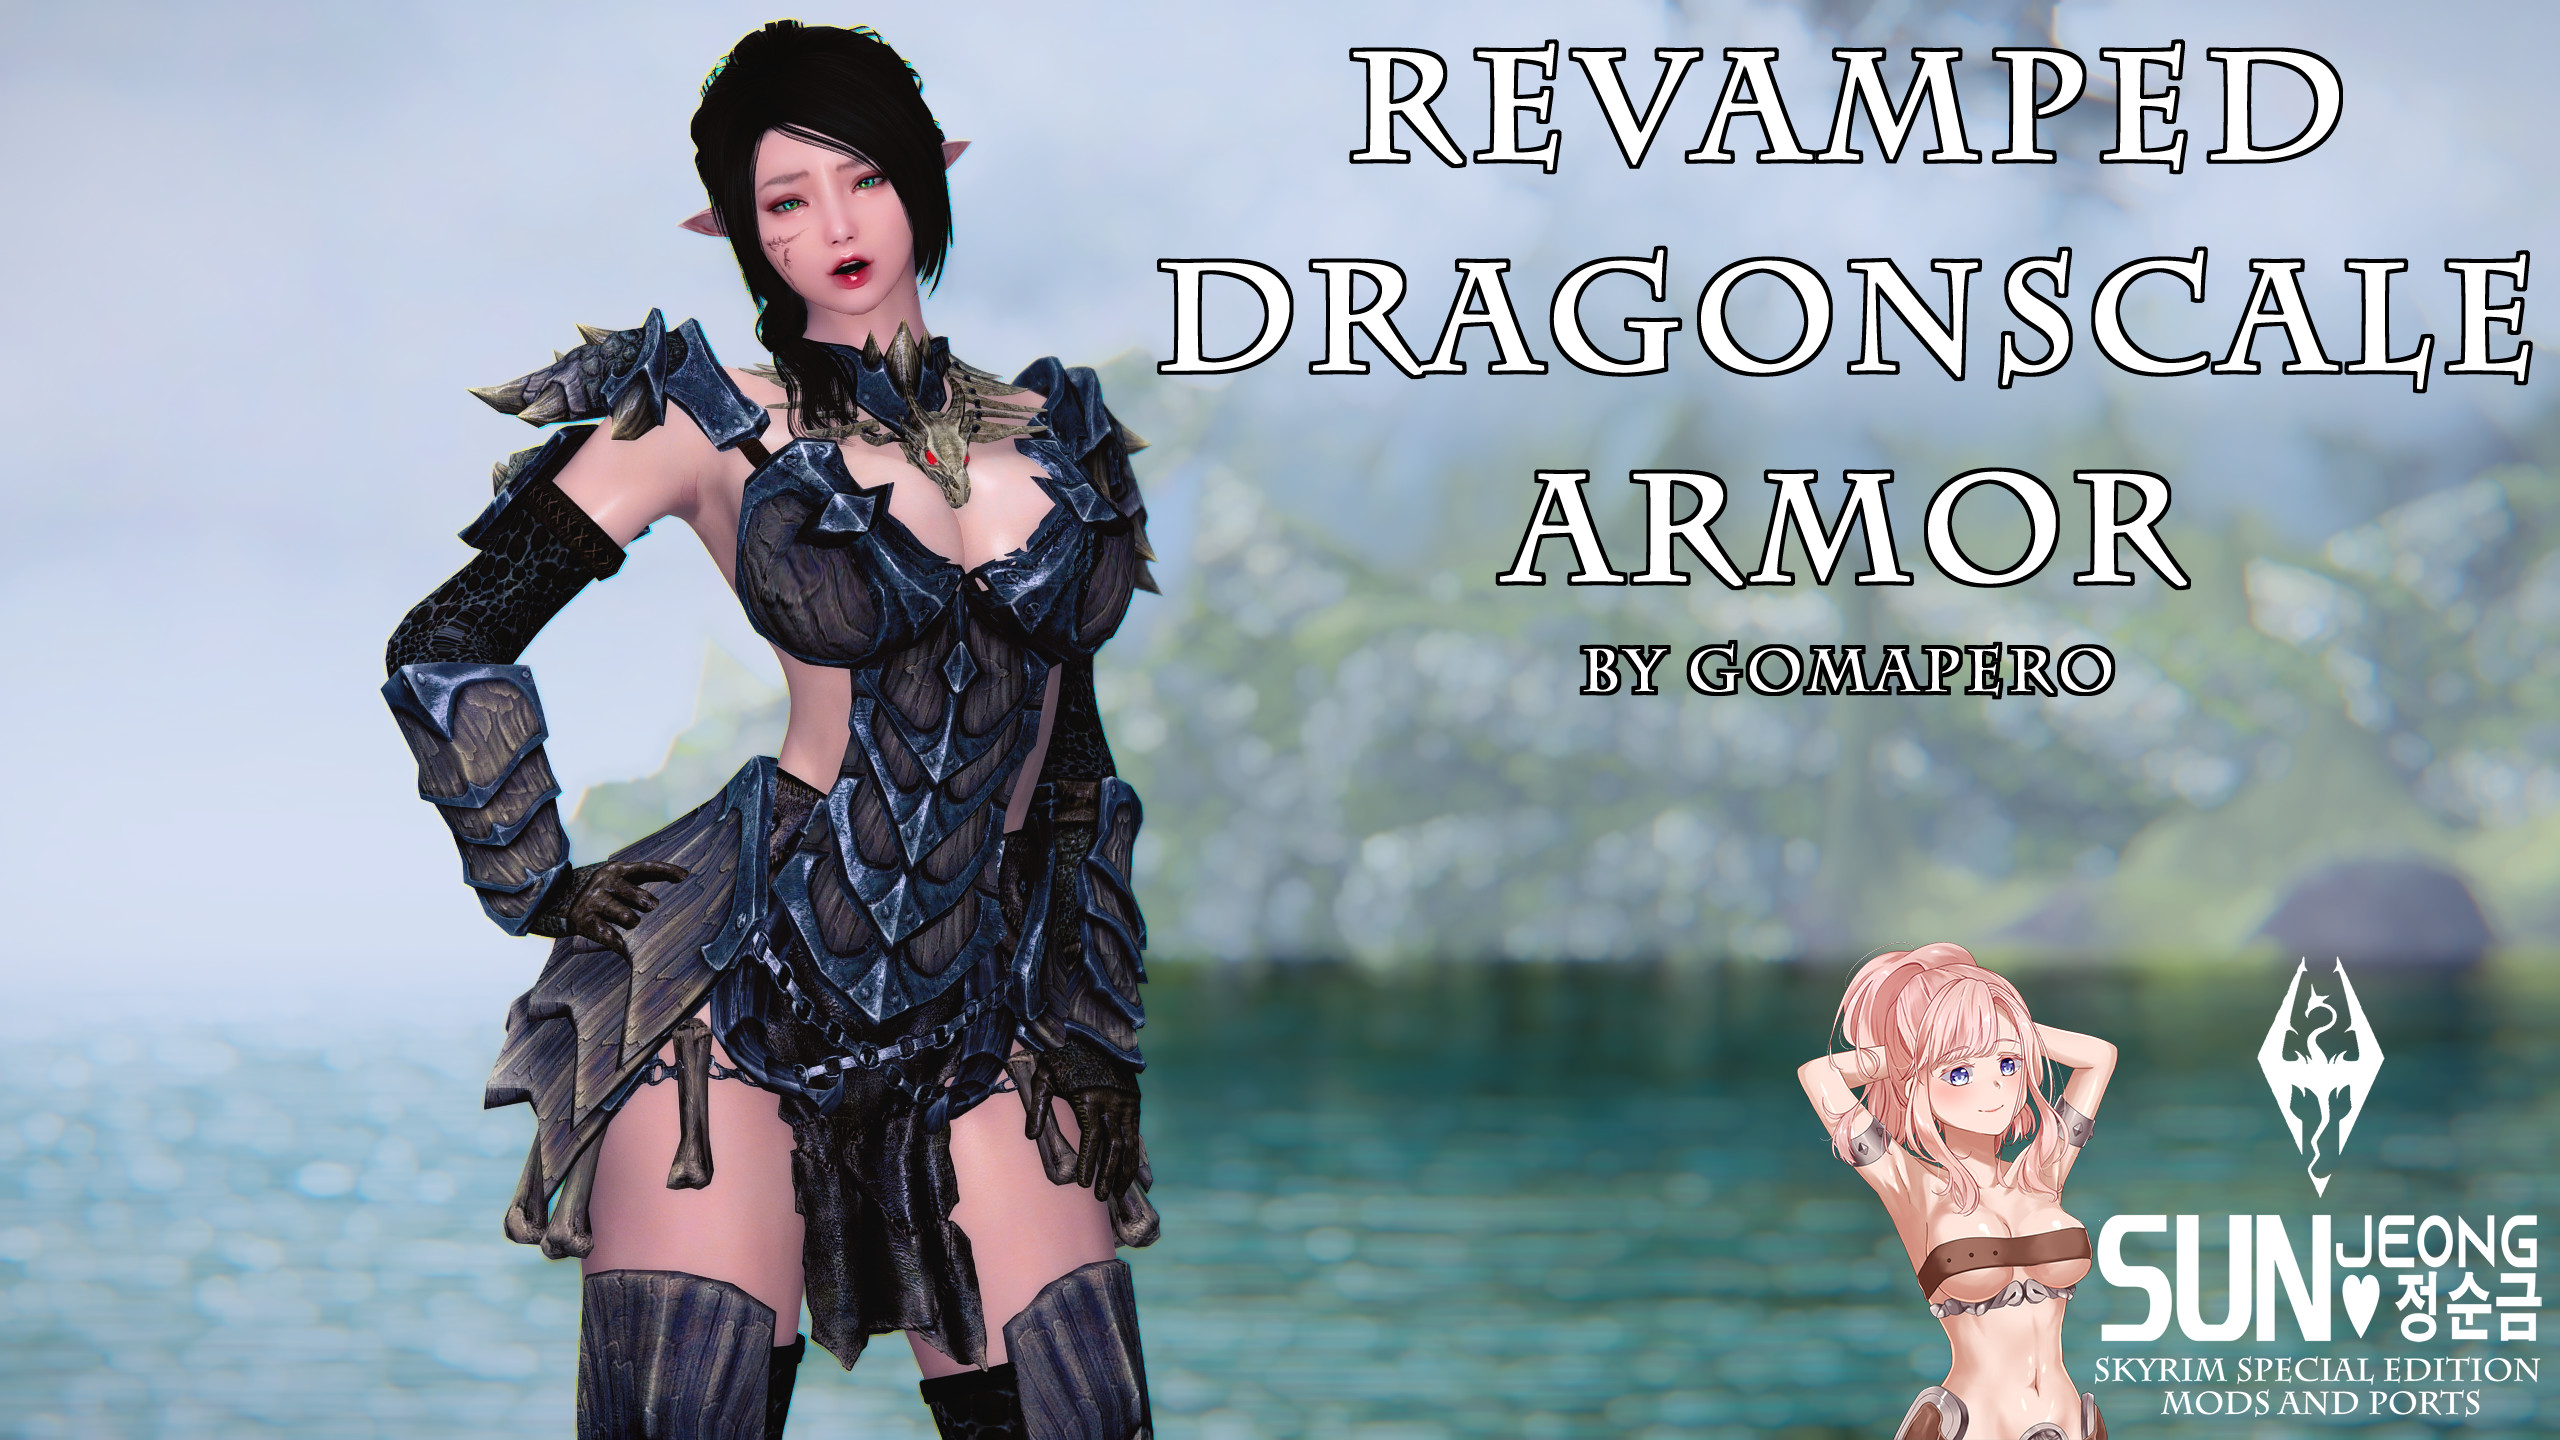 Revamped Dragonscale Armor